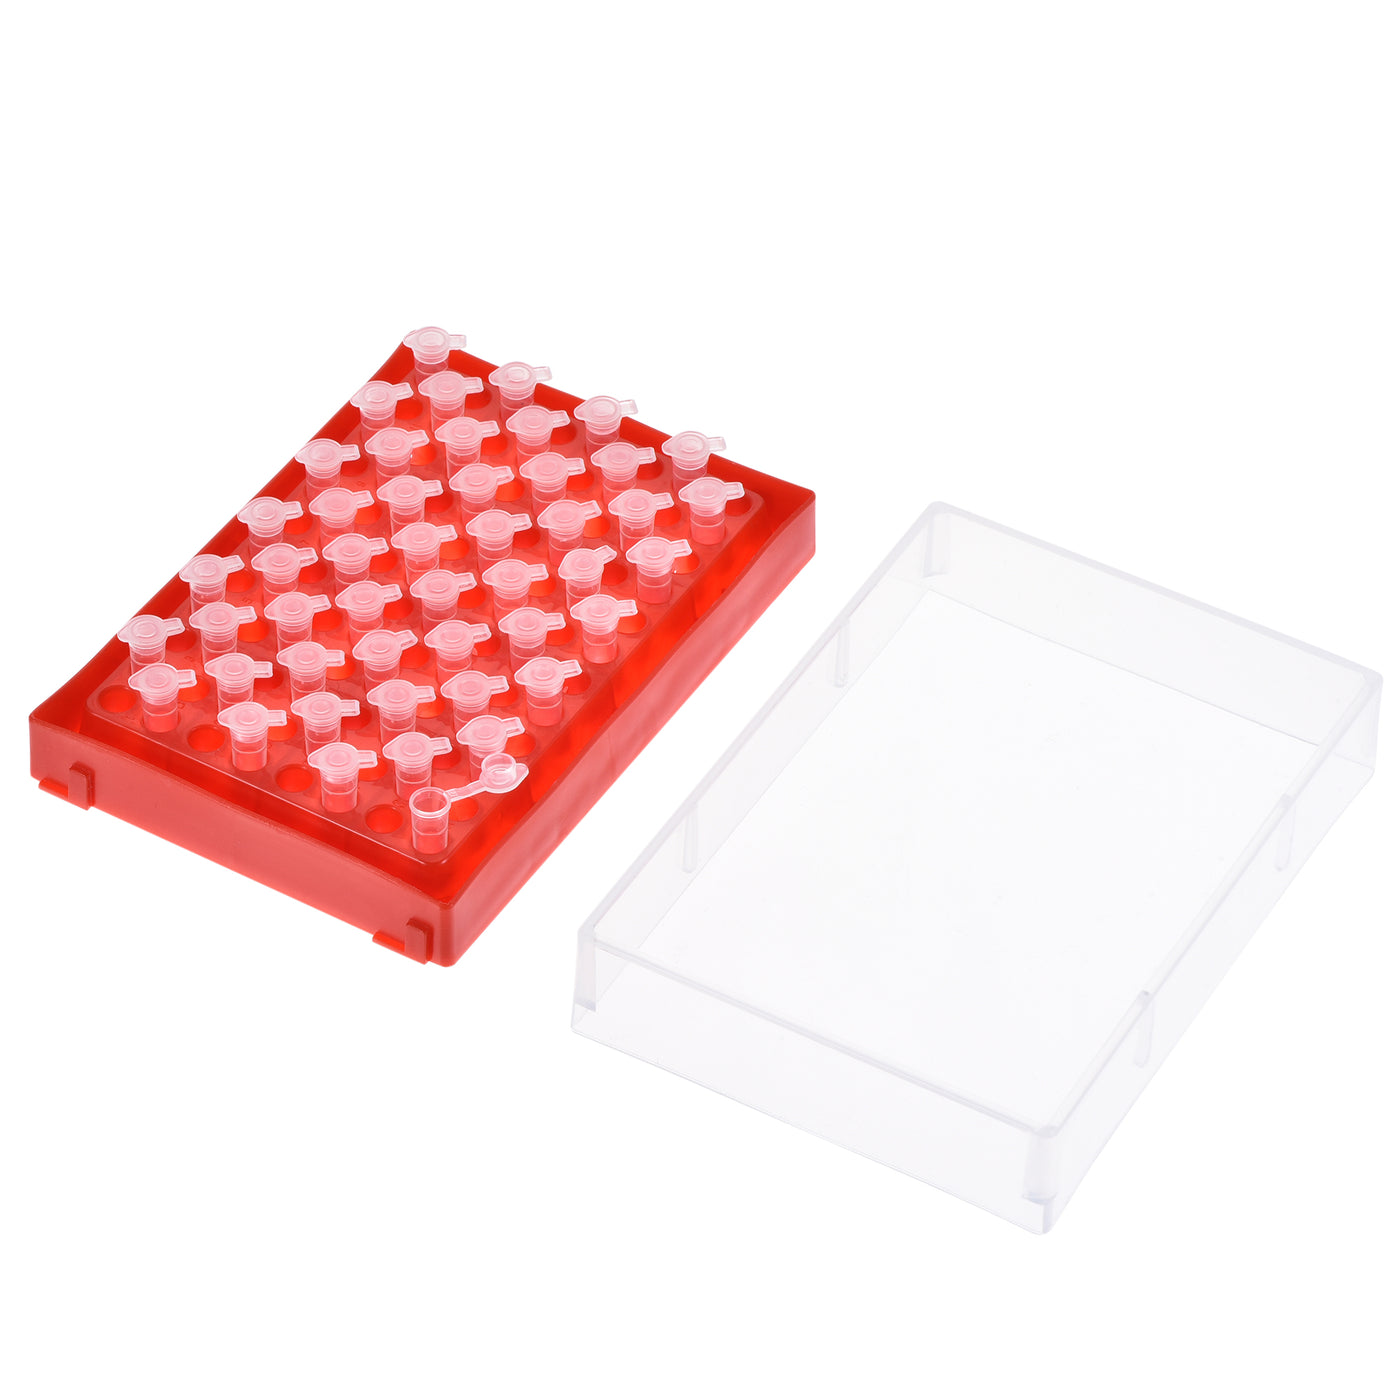 uxcell Uxcell Centrifuge Tube Freezer Storage Box 96-Well PP Holder Red for 0.2ml Tubes